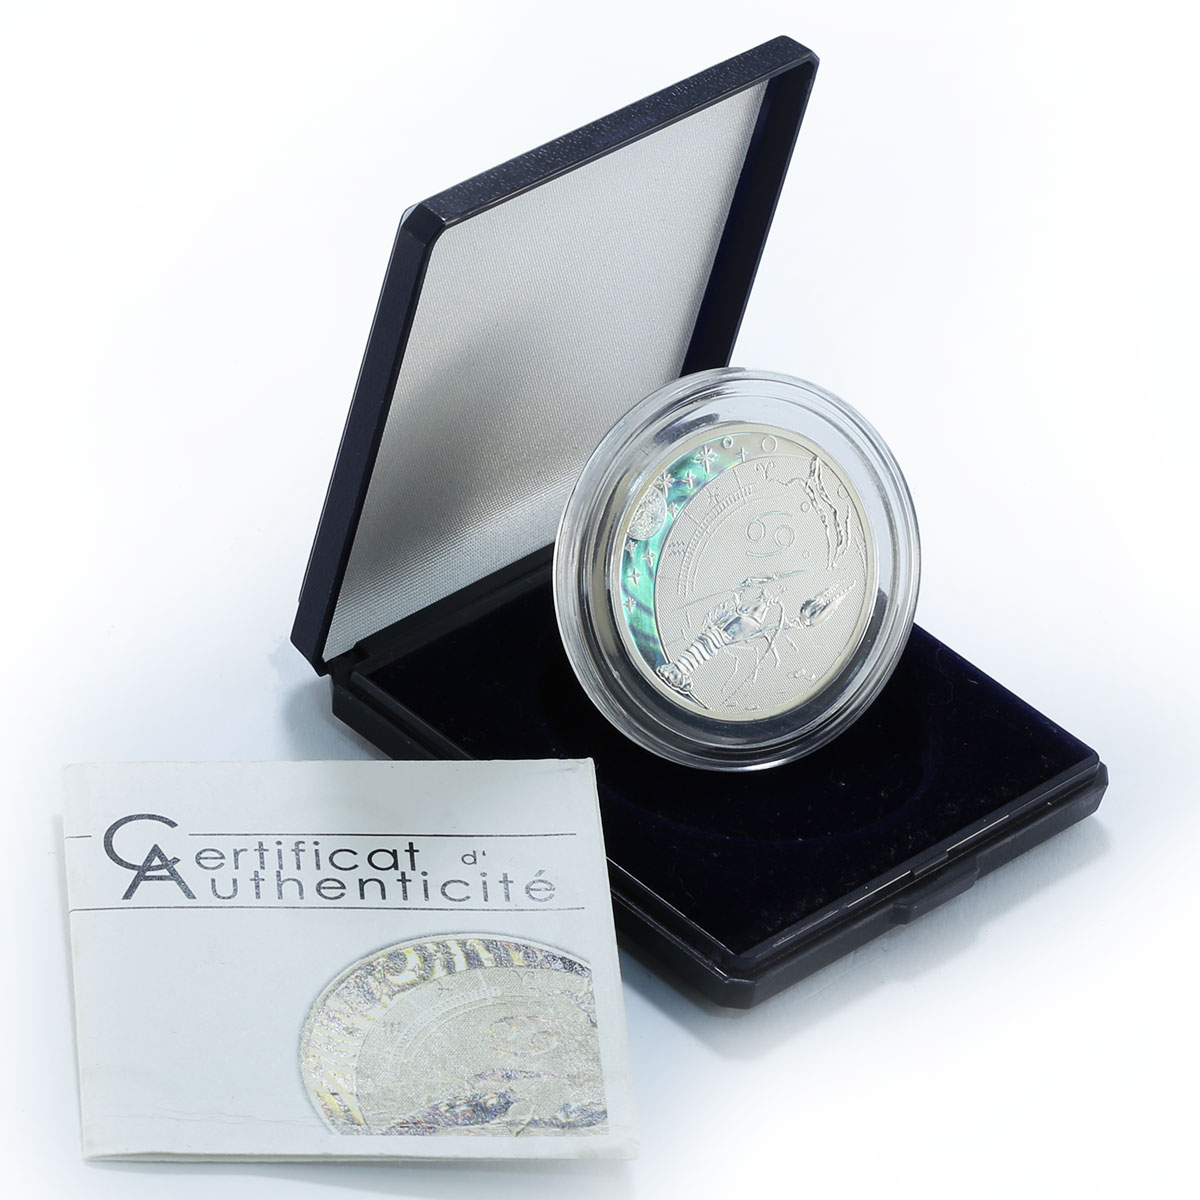 Cameroon 500 francs Cancer Zodiac signs series hologram silver coin 2010